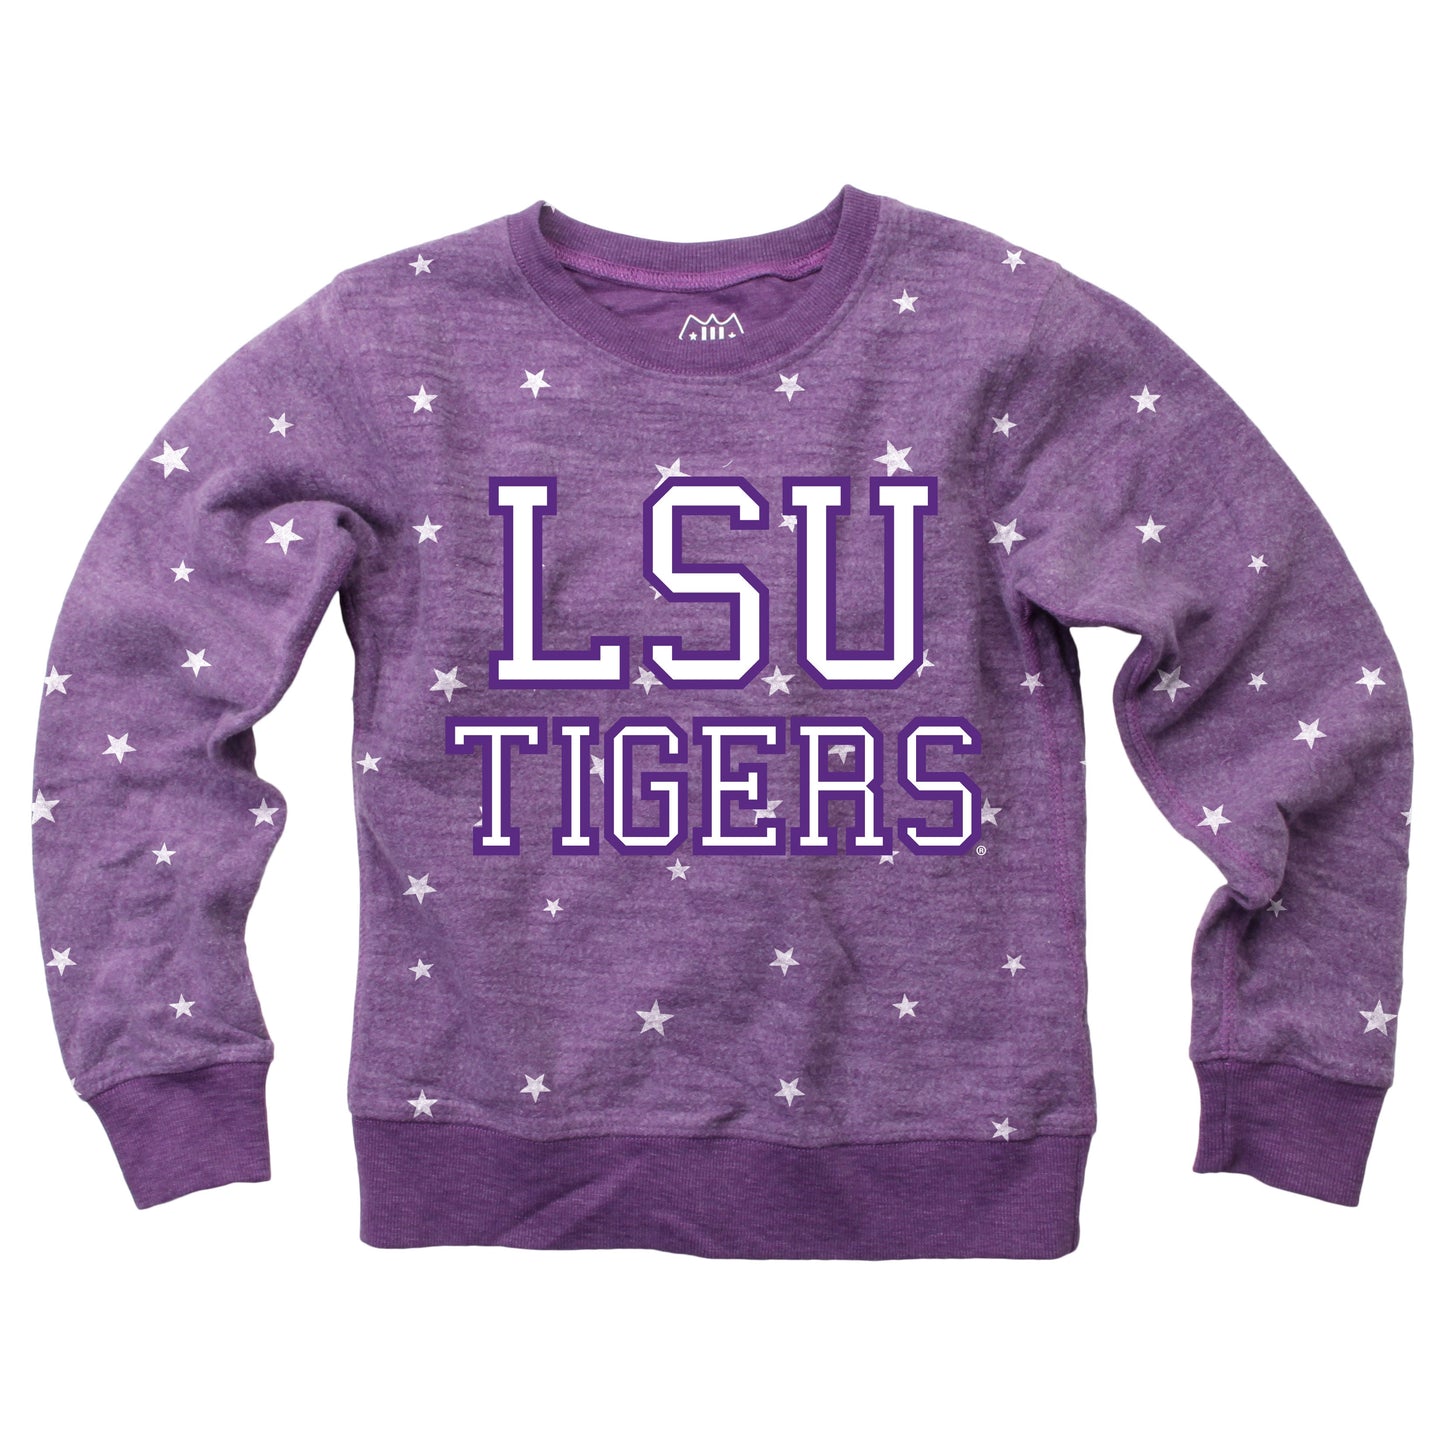 LSU Tigers youth Allover Star Fleece Top